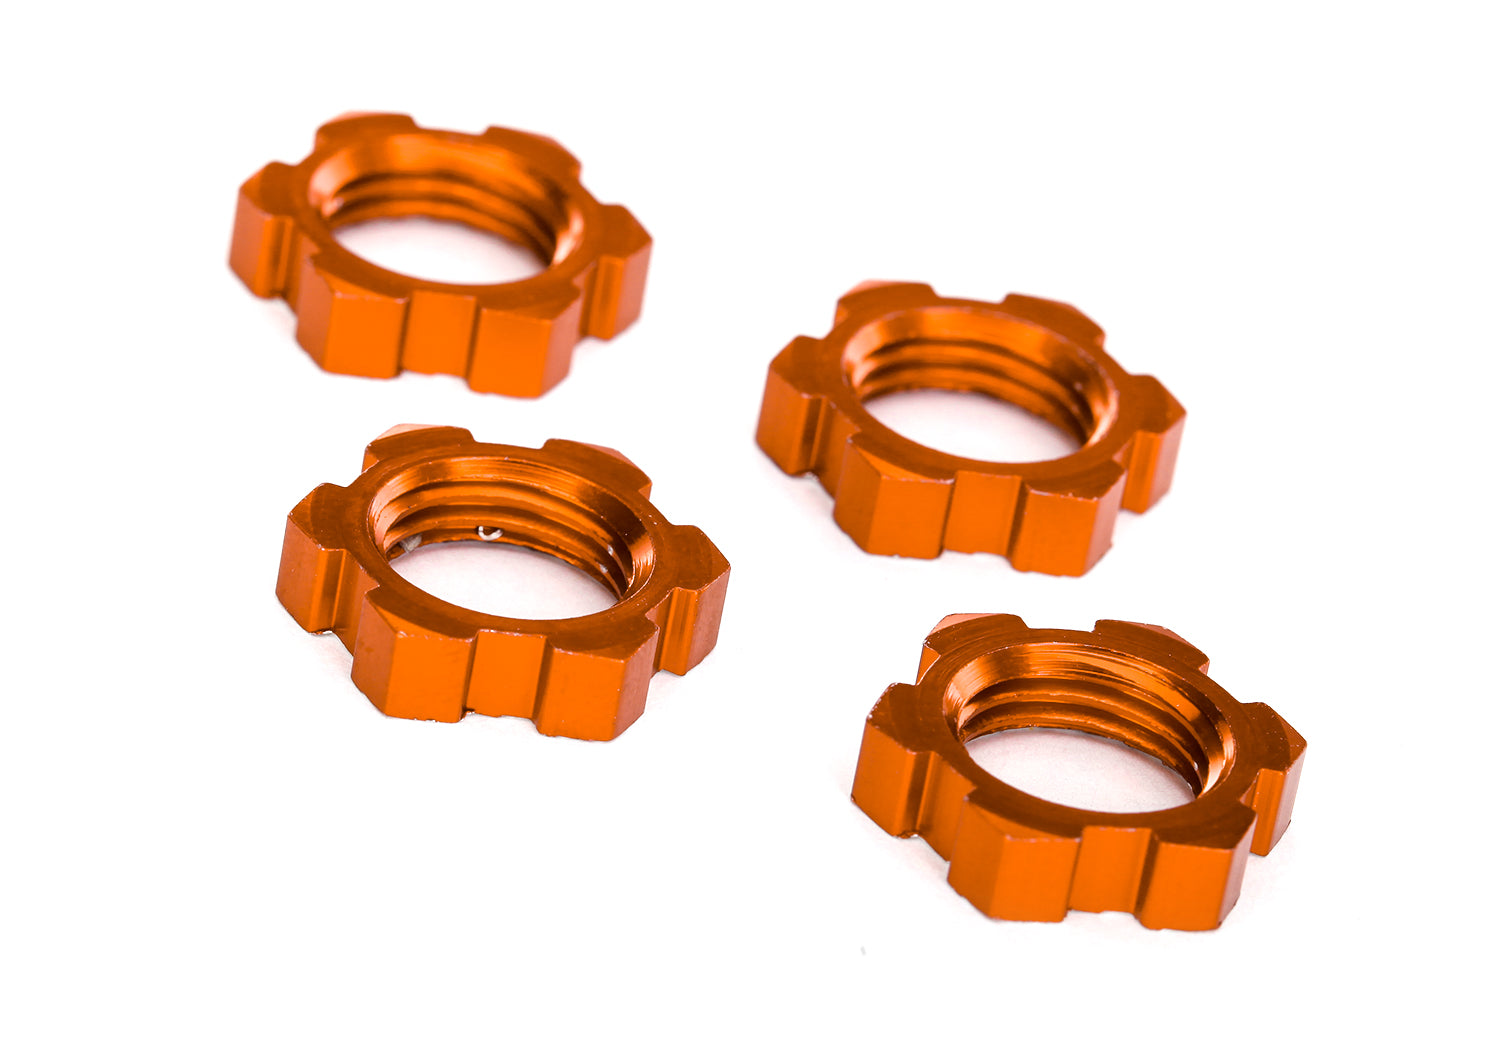 Traxxas 17mm Serrated Wheel Nuts (4) (Assorted Colors)